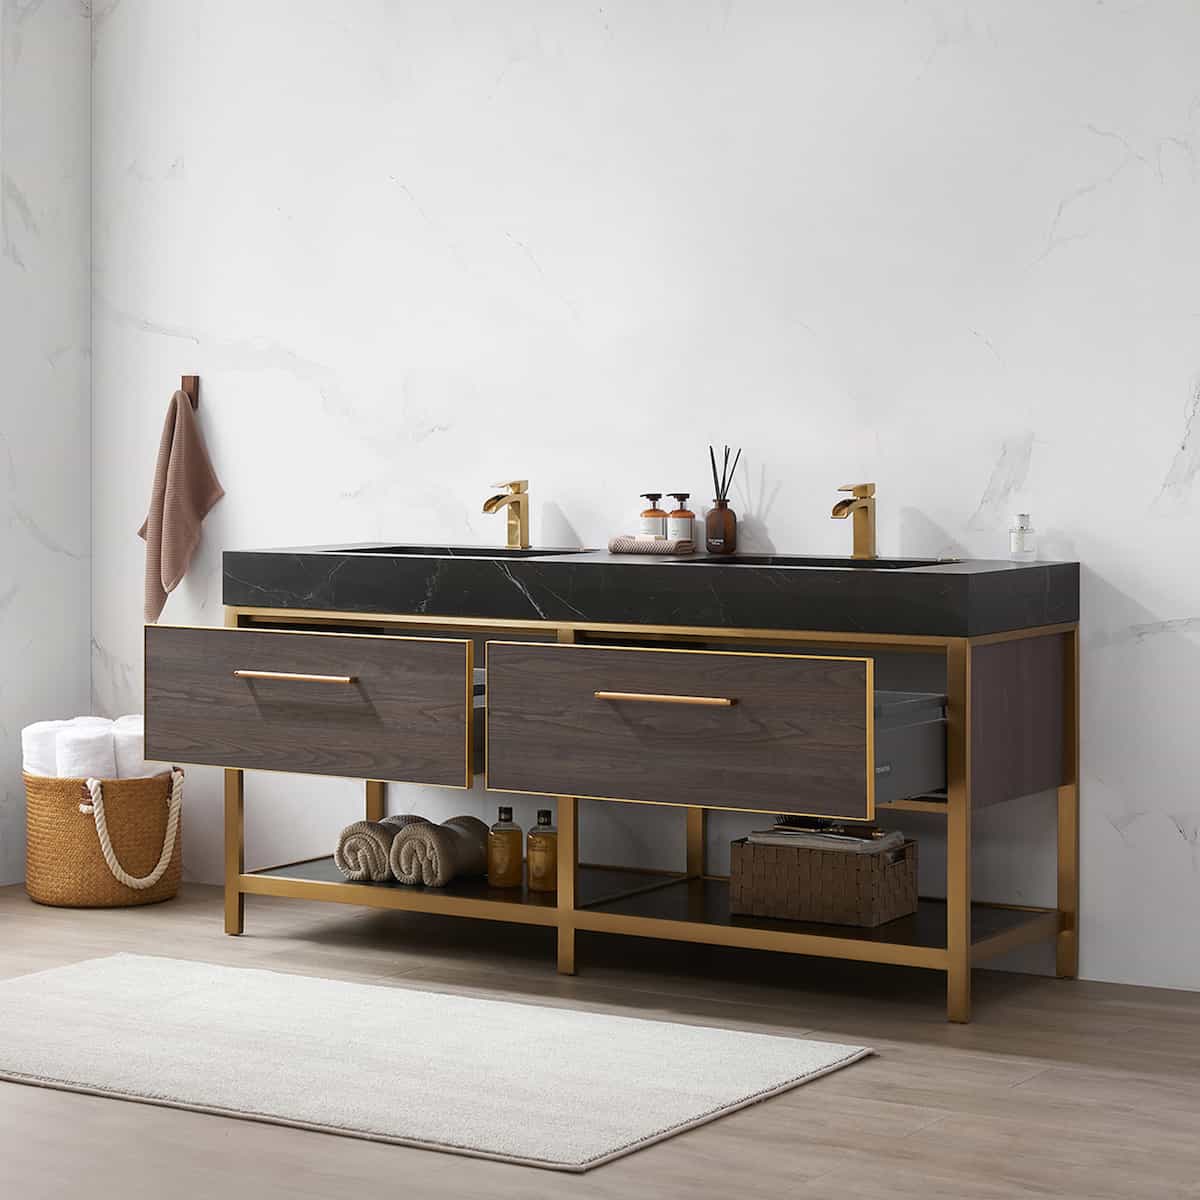 Vinnova Segovia 72 Inch Freestanding Double Sink Bath Vanity in Suleiman Oak with Black Sintered Stone Top Without Mirror Drawers 702072-SO-SL-NM #mirror_without mirror